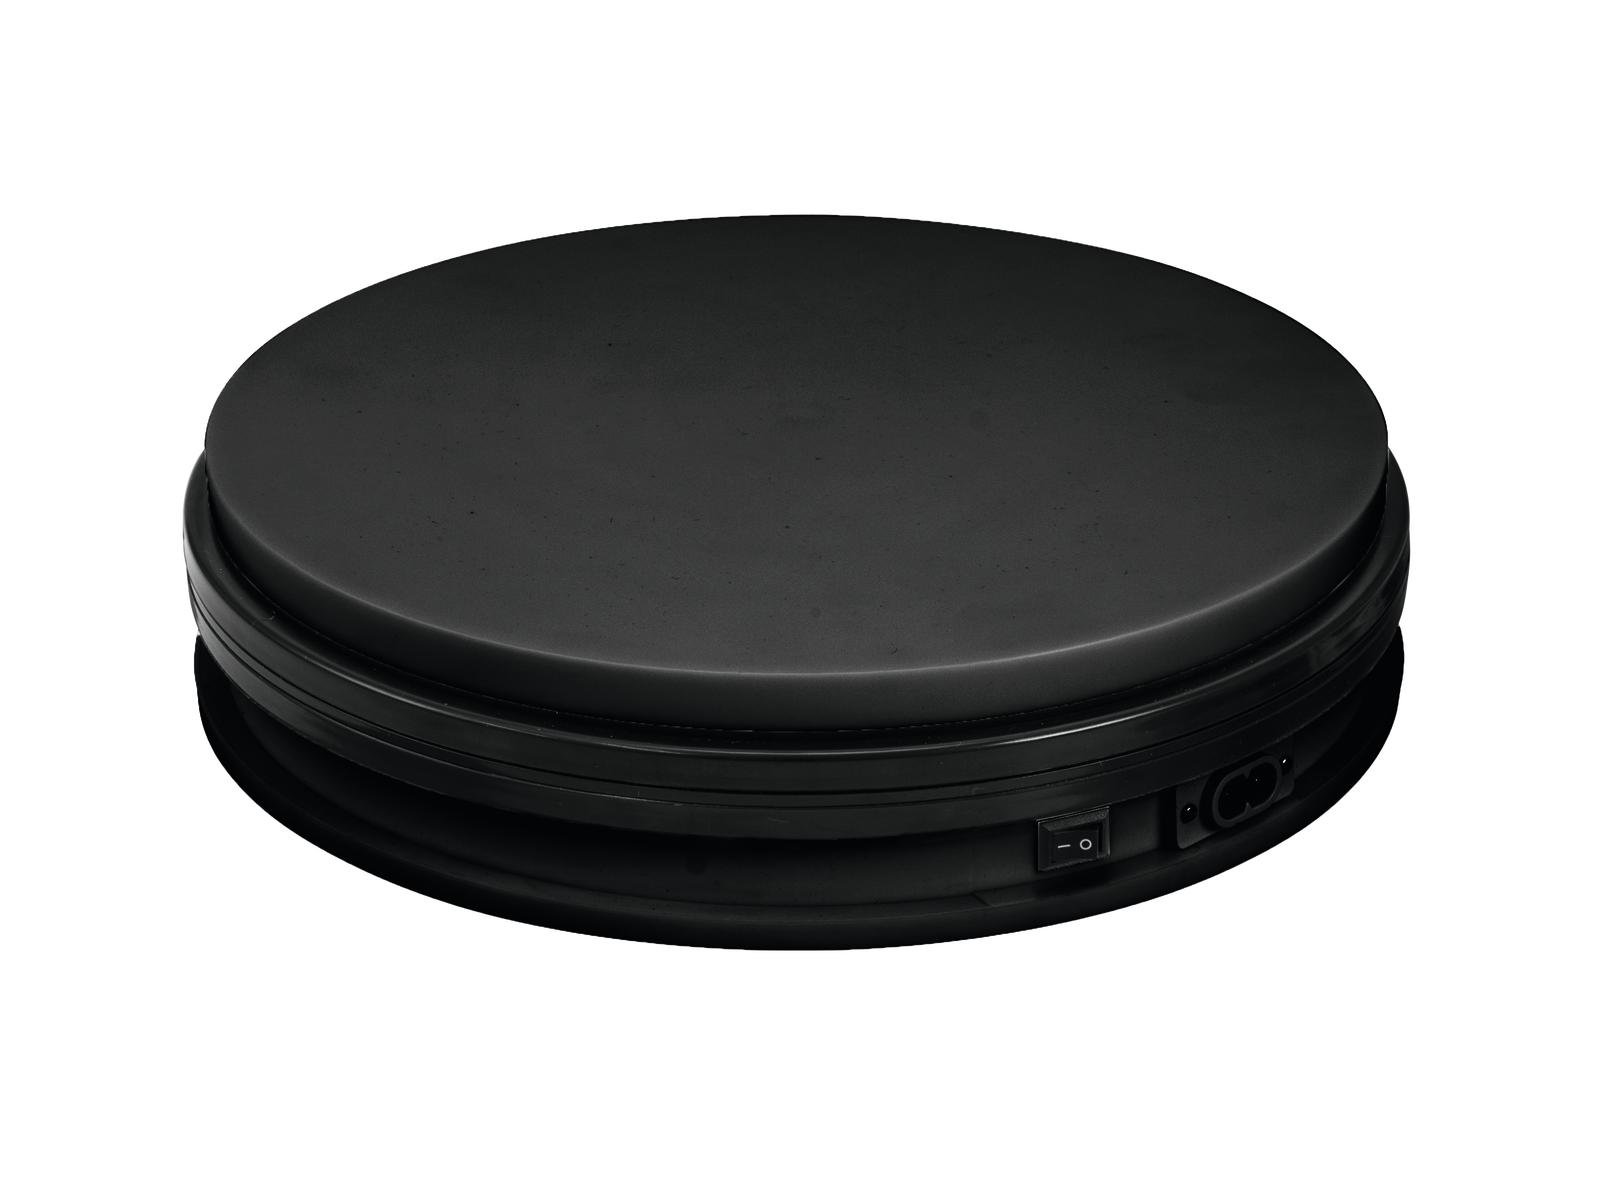 EUROPALMS Rotary Plate 45cm up to 40kg black